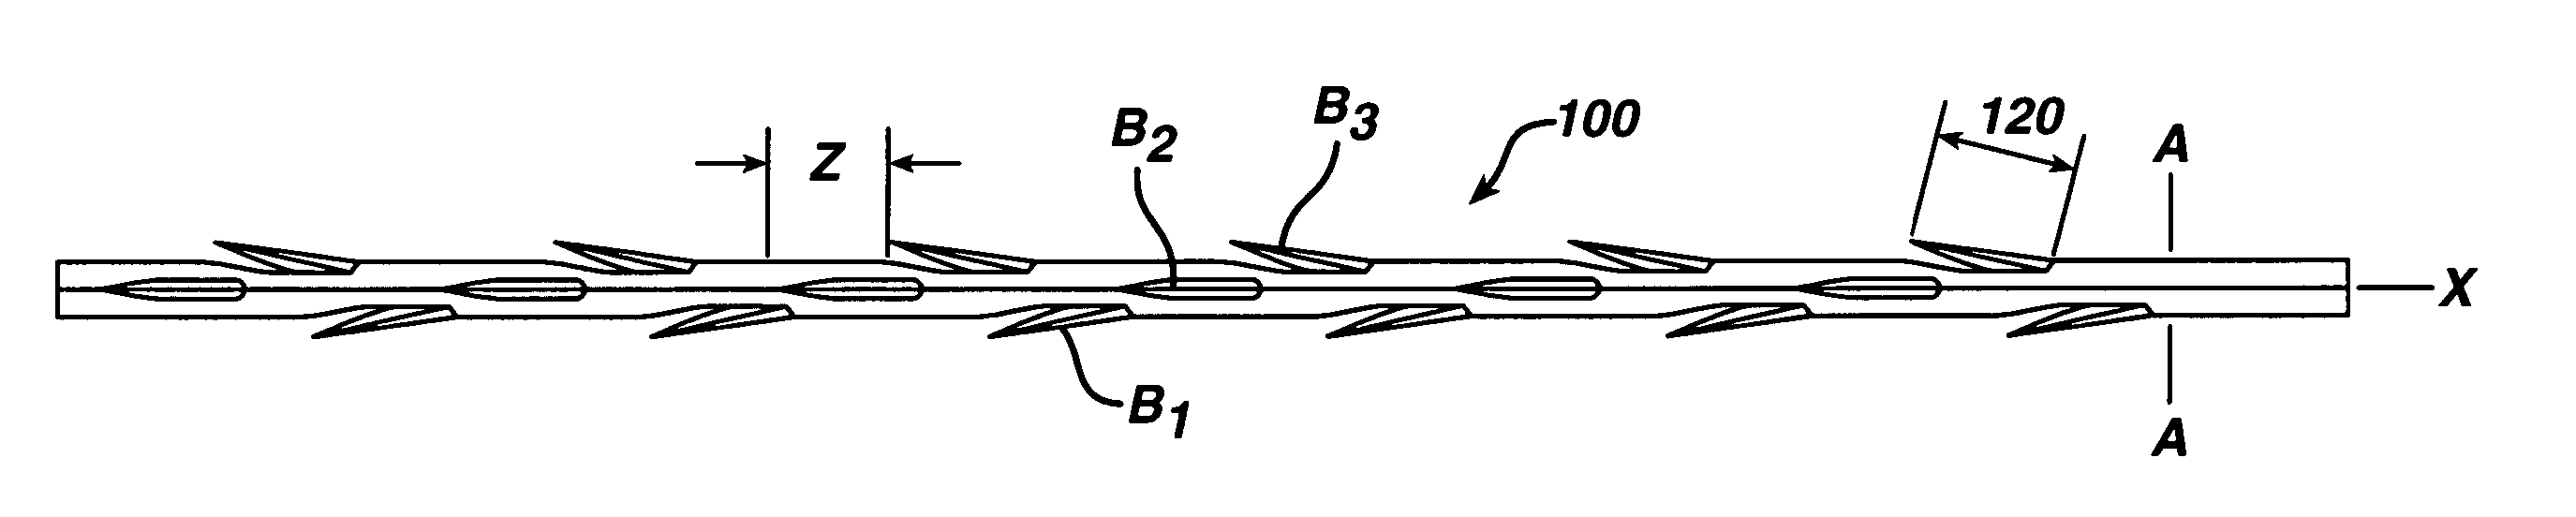 Barbed suture